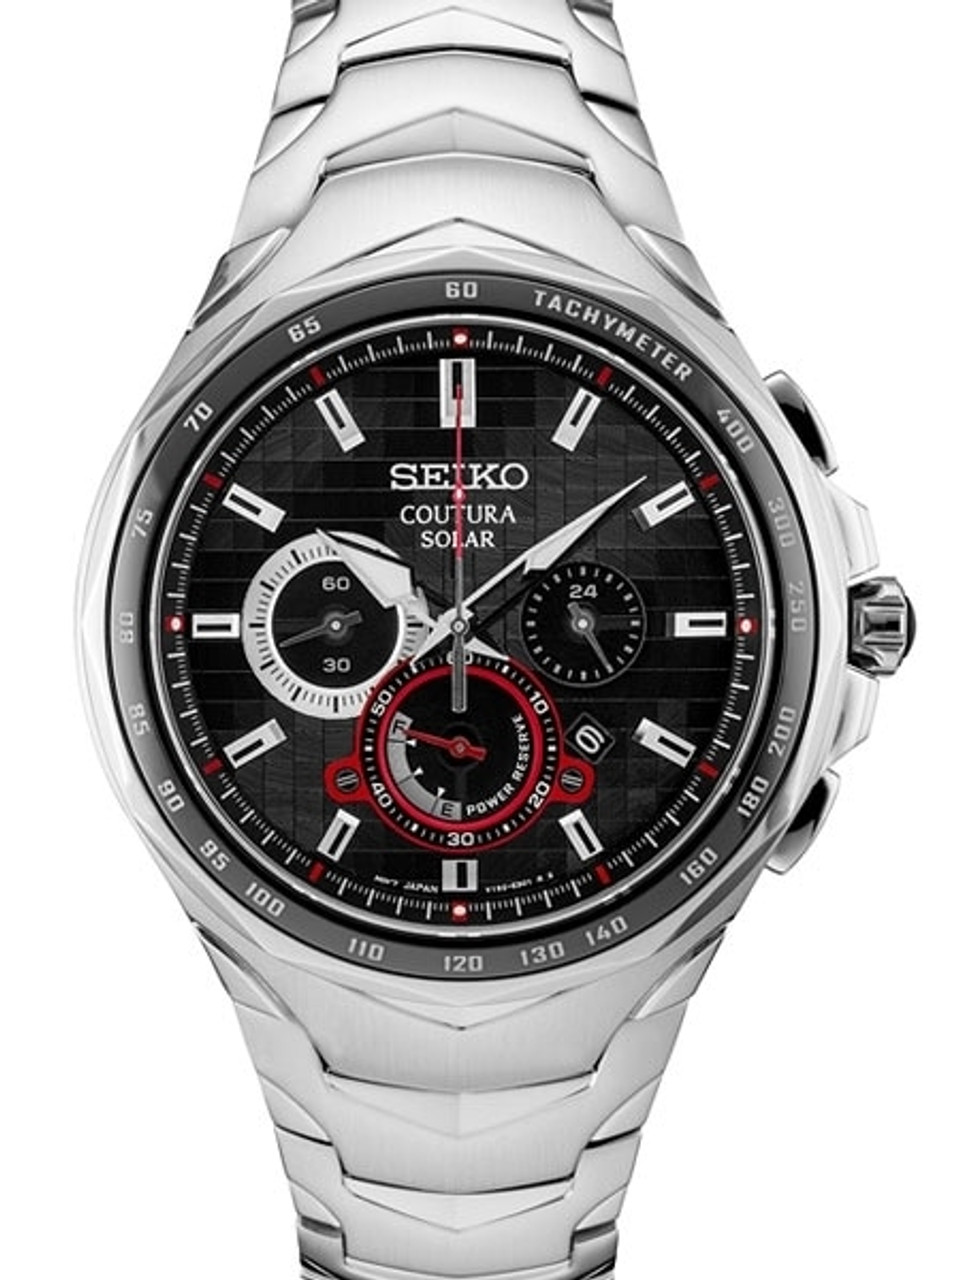 Seiko Coutura Solar Powered Chronograph with Sapphire Crystal #SSC743